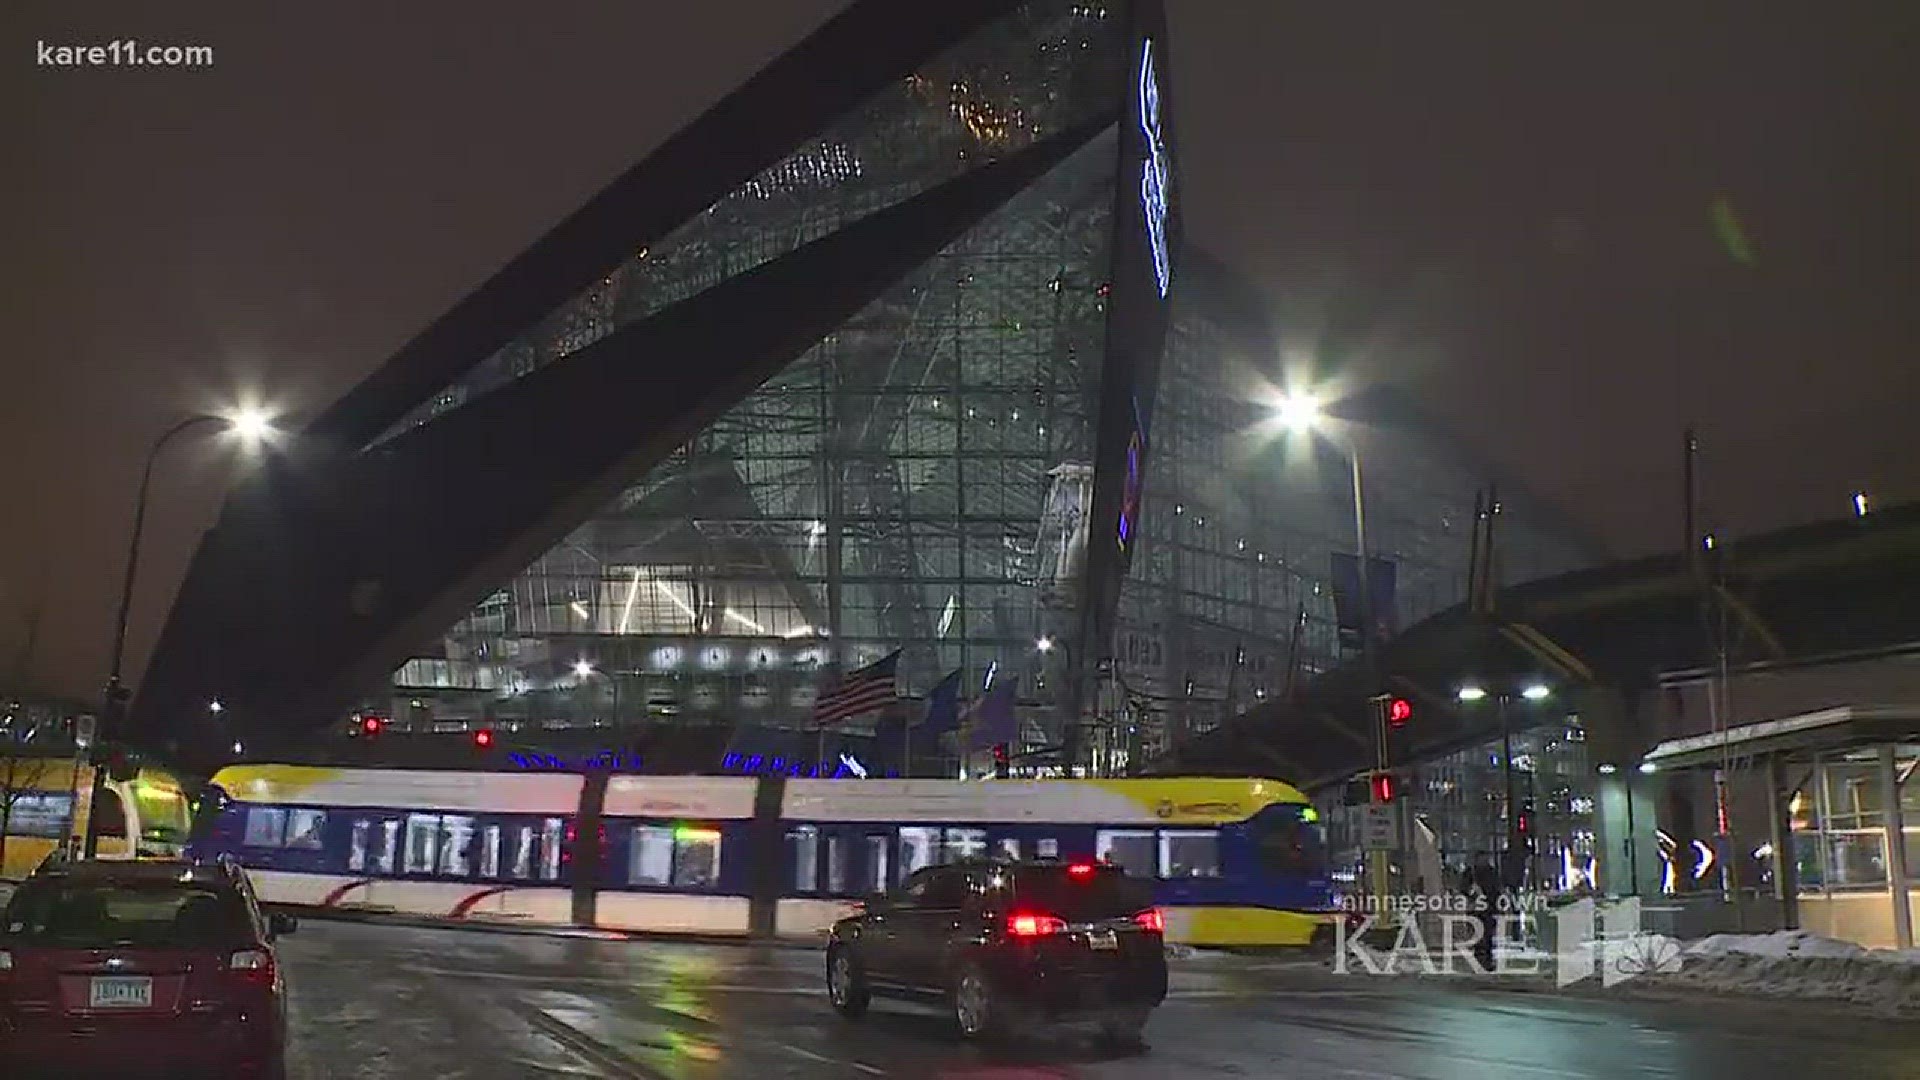 With a possibility of a strike during the Super Bowl, about 2,500 union members with Metro Transit are voting on a new contract. http://kare11.tv/2AO9mGj